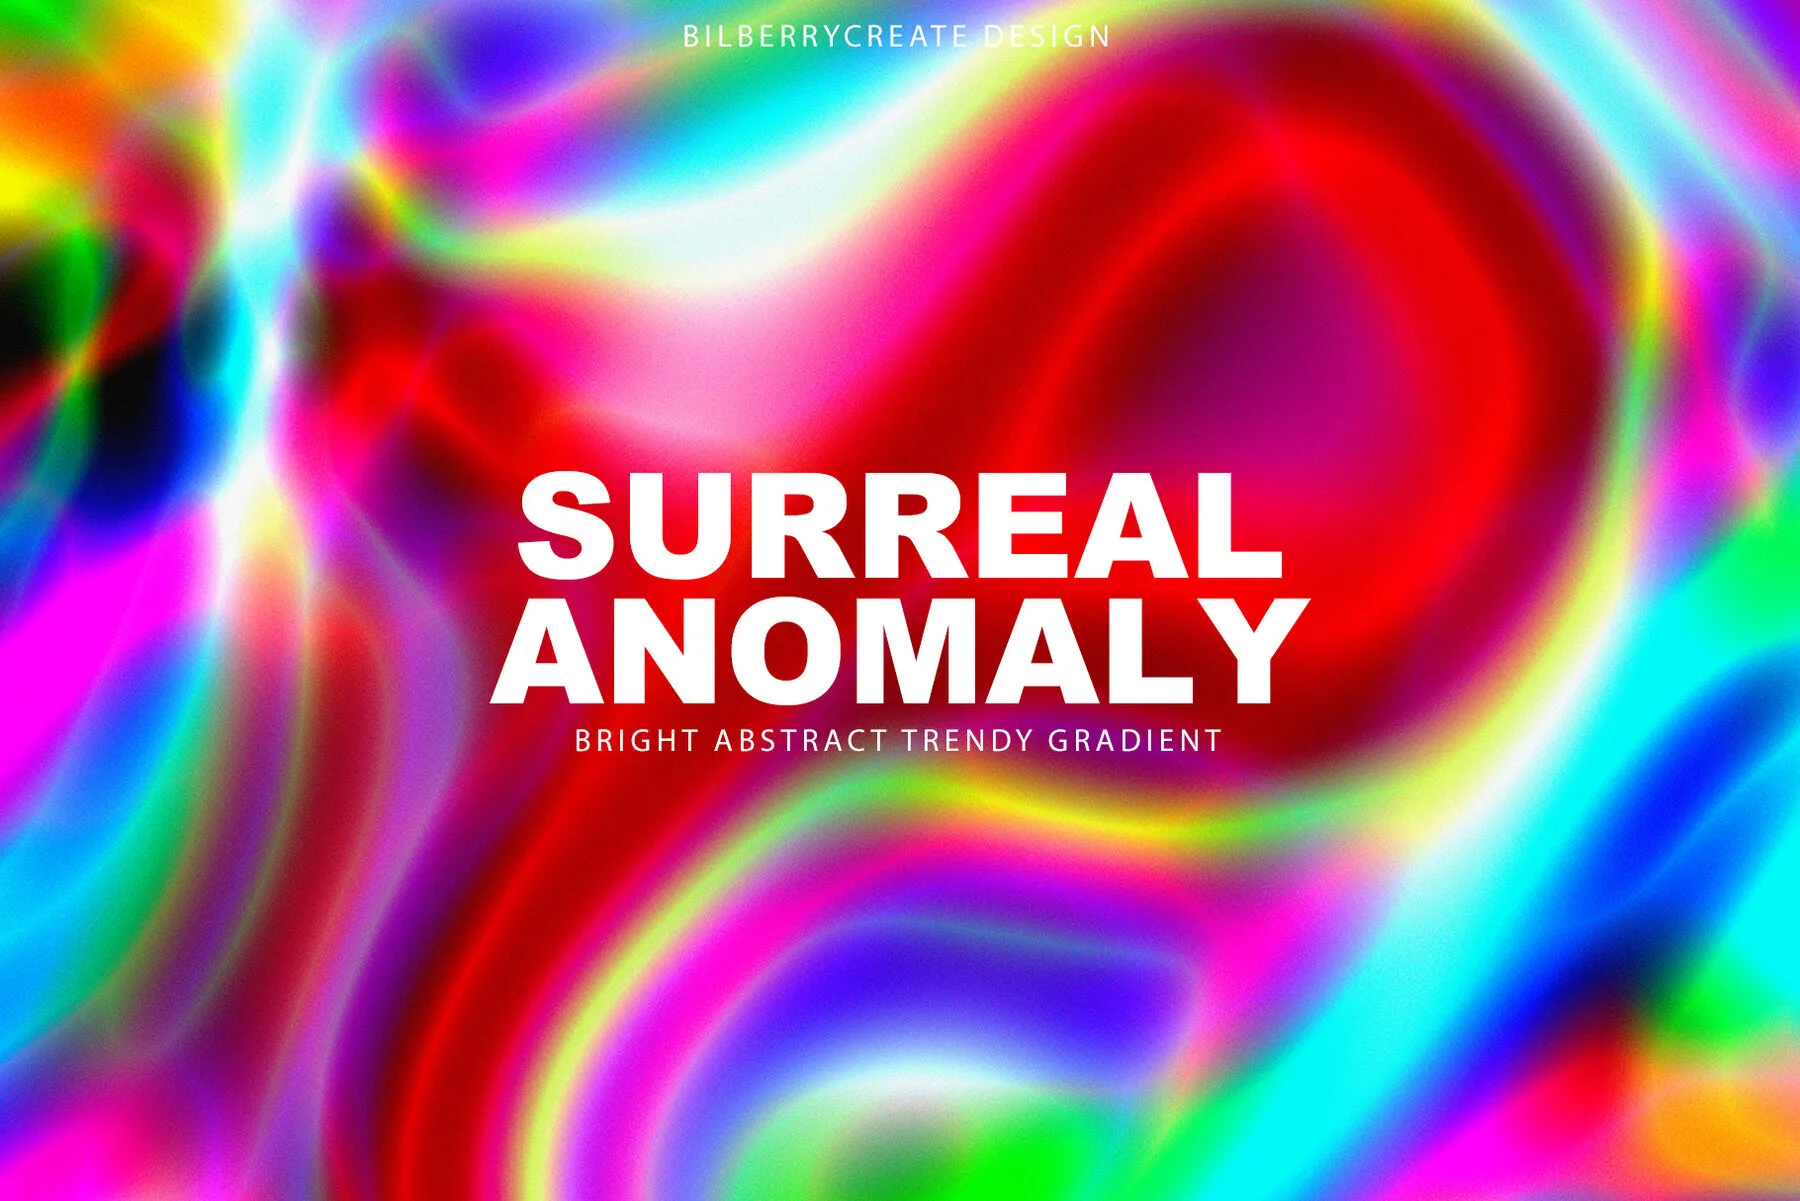 Surreal Anomaly gradient background